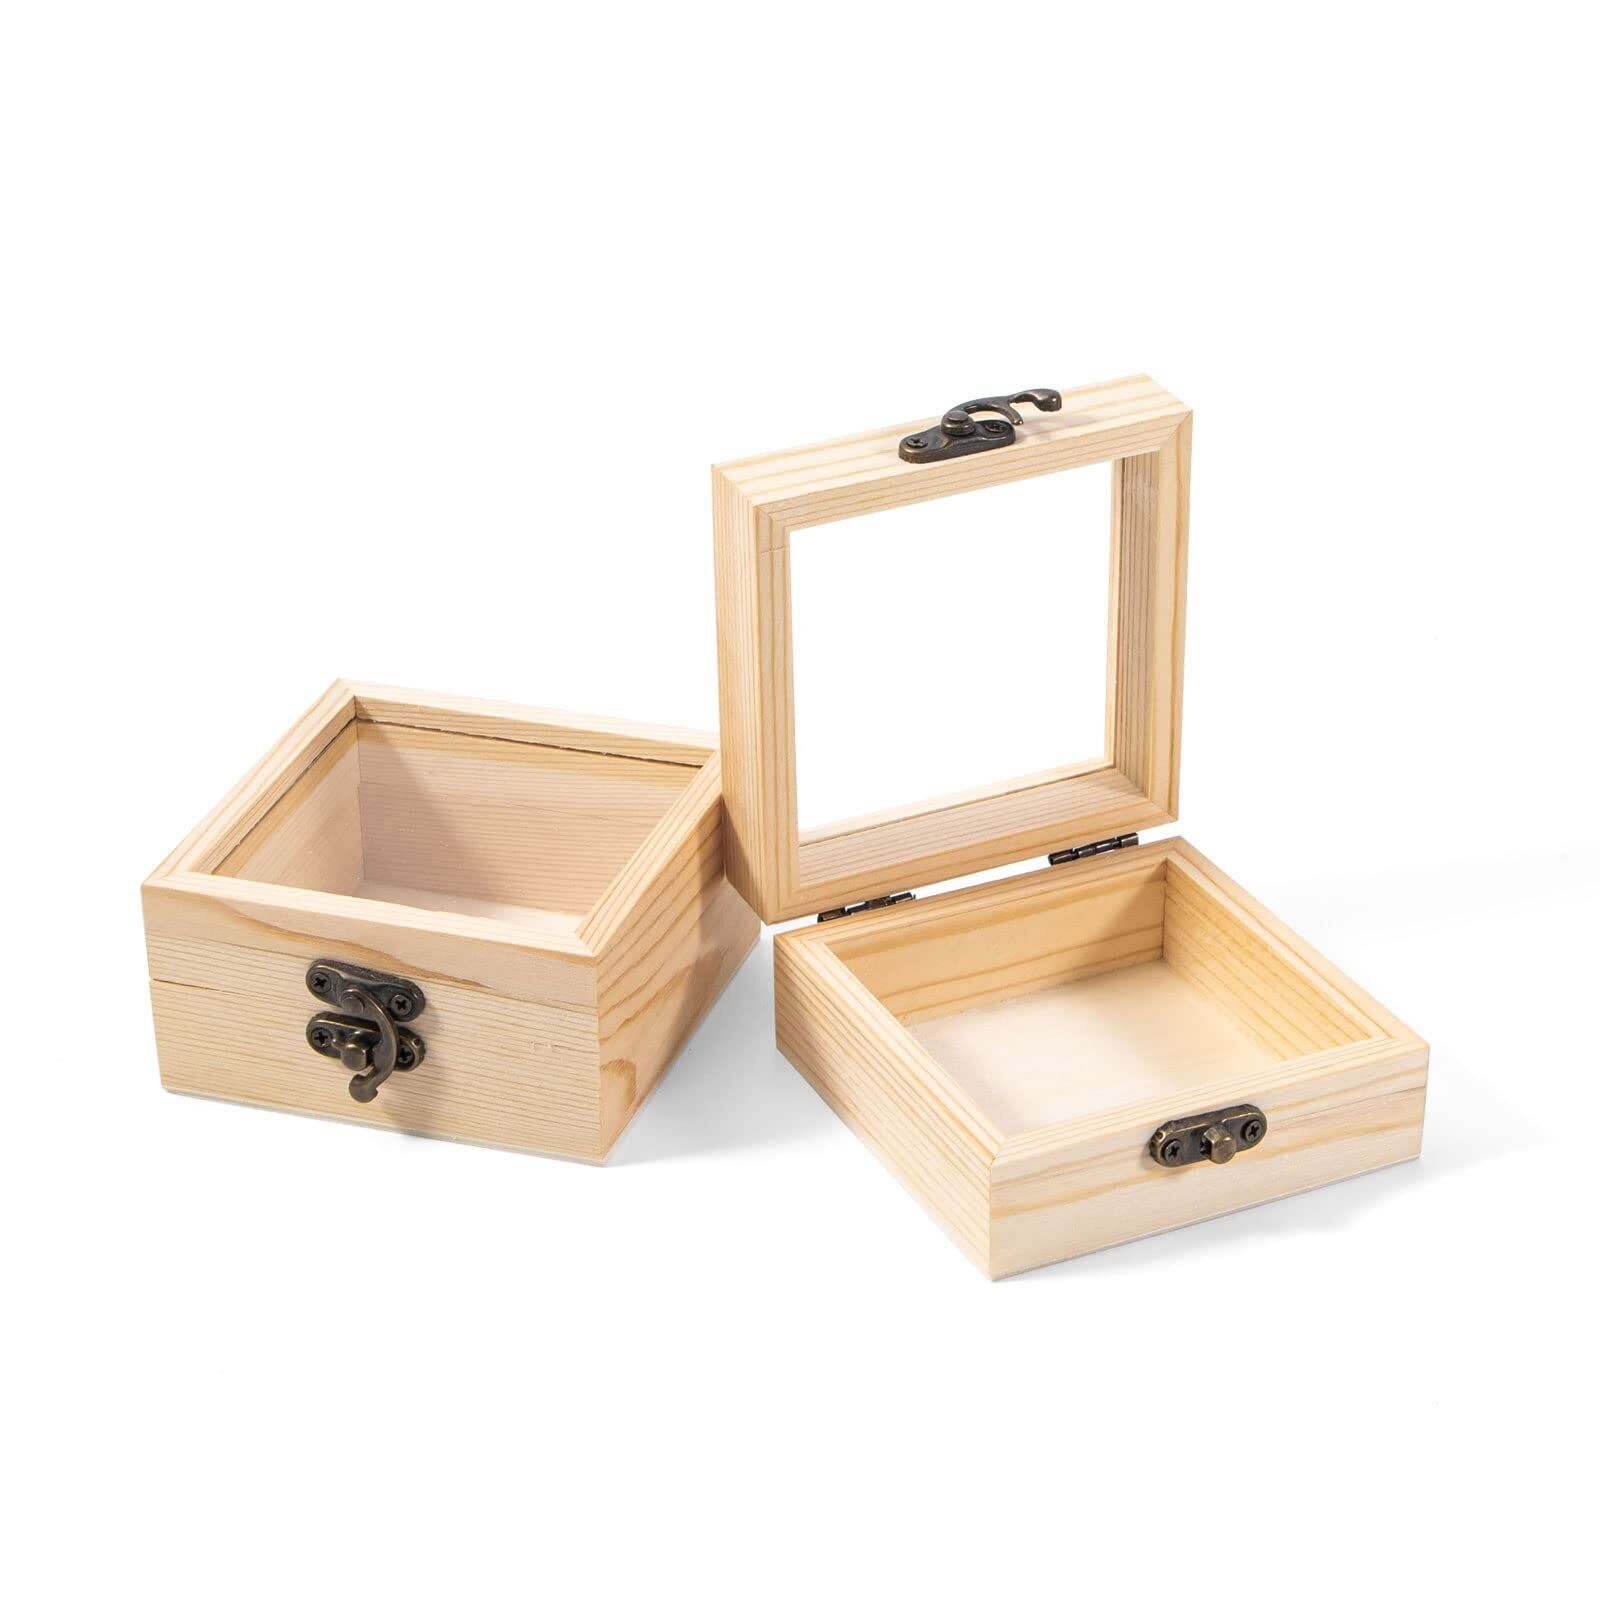 2Pcs Small Wooden Box with Hinged Lid, 3.4\'\' x 3.4\'\' x 1.7\'\' Unfinished Wood ...